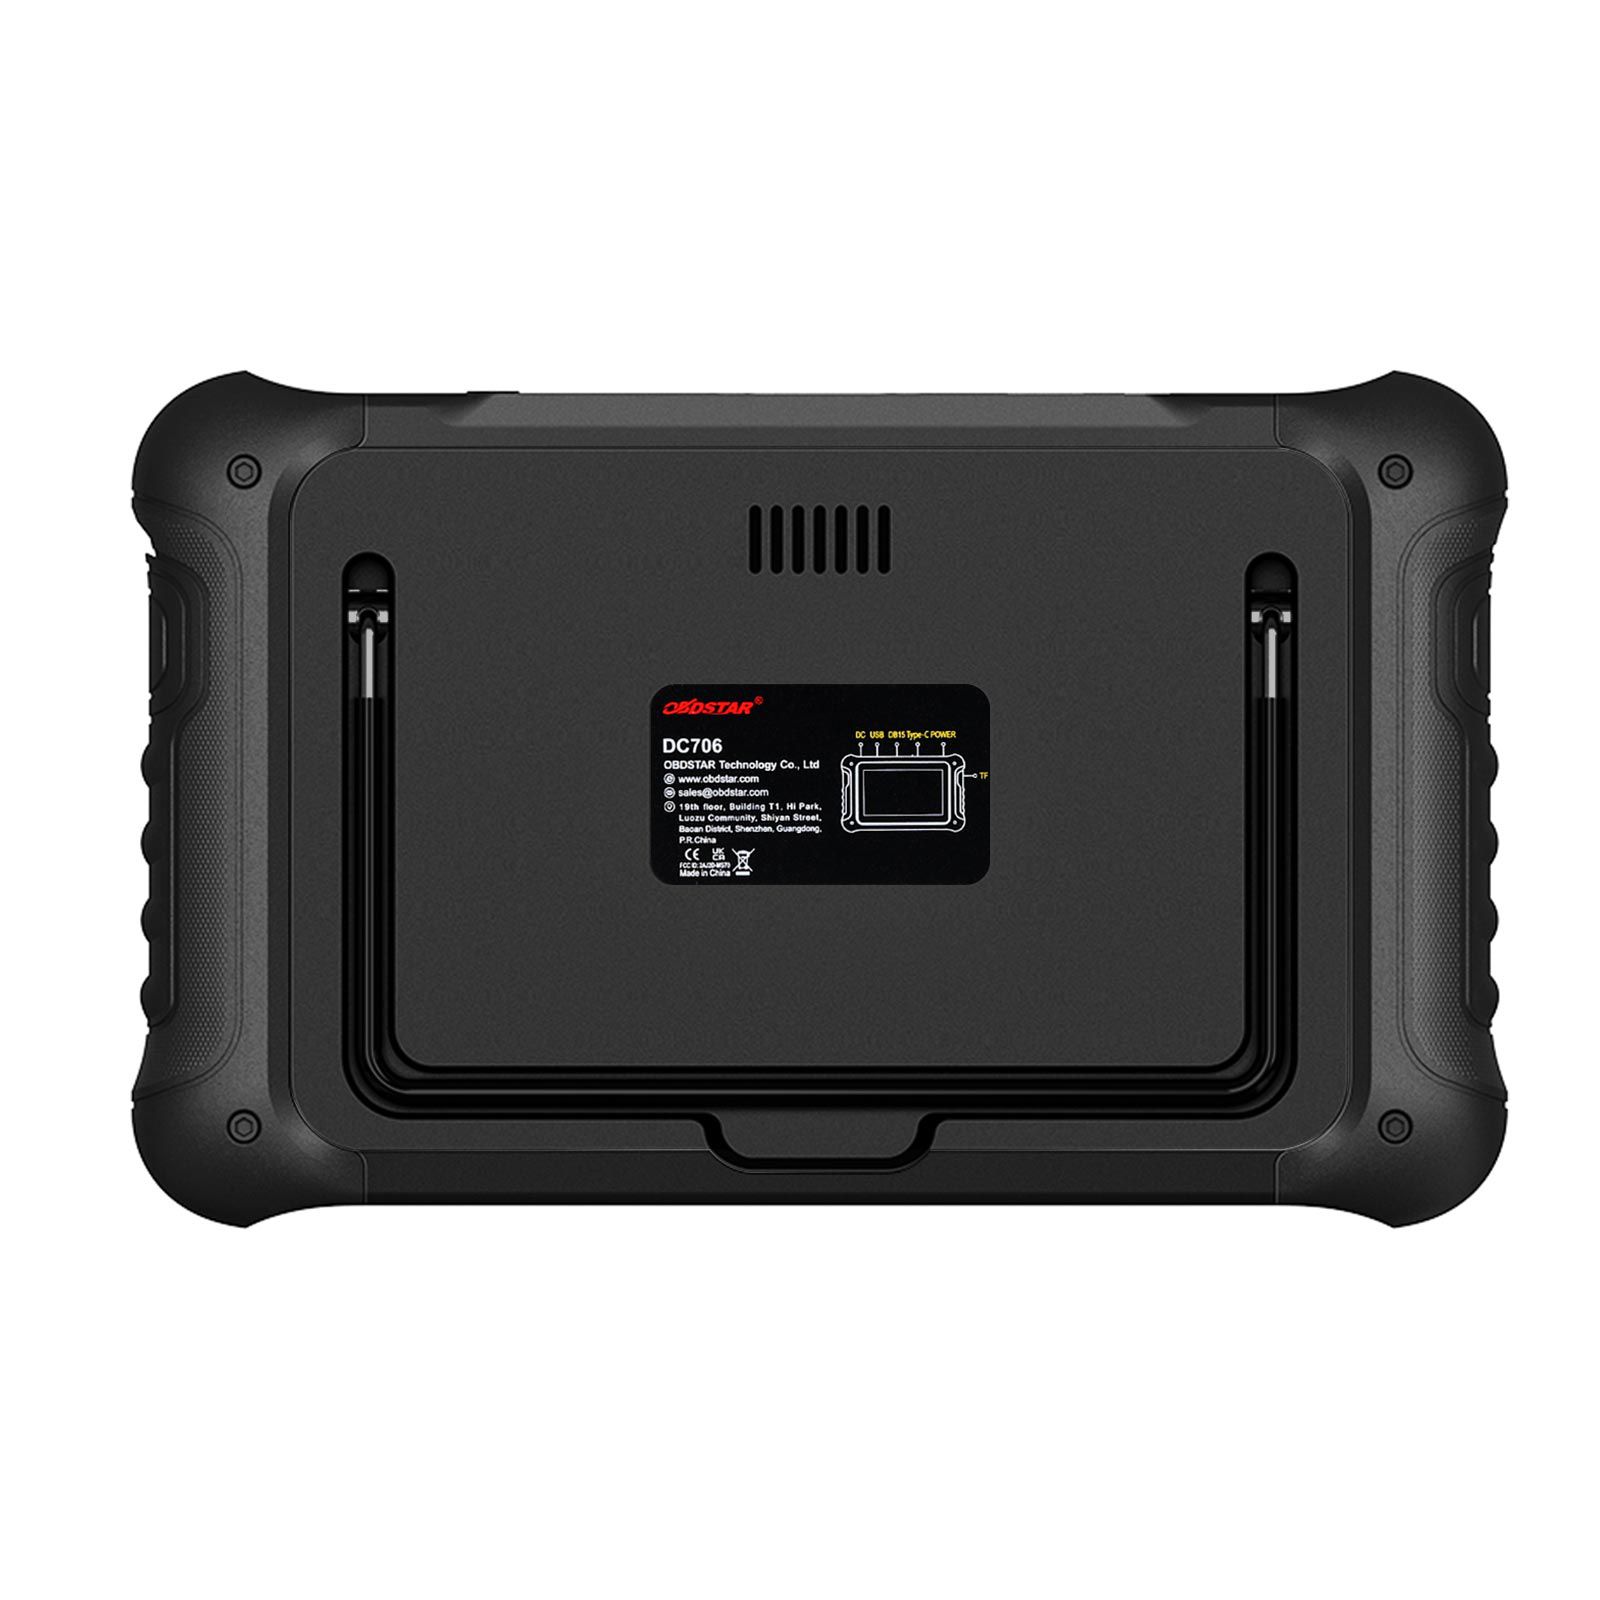 OBDSTAR DC706 ECU Tool for Car and Motorcycle with ECM+TCM+BODY ECU Clone by OBD or BENCH